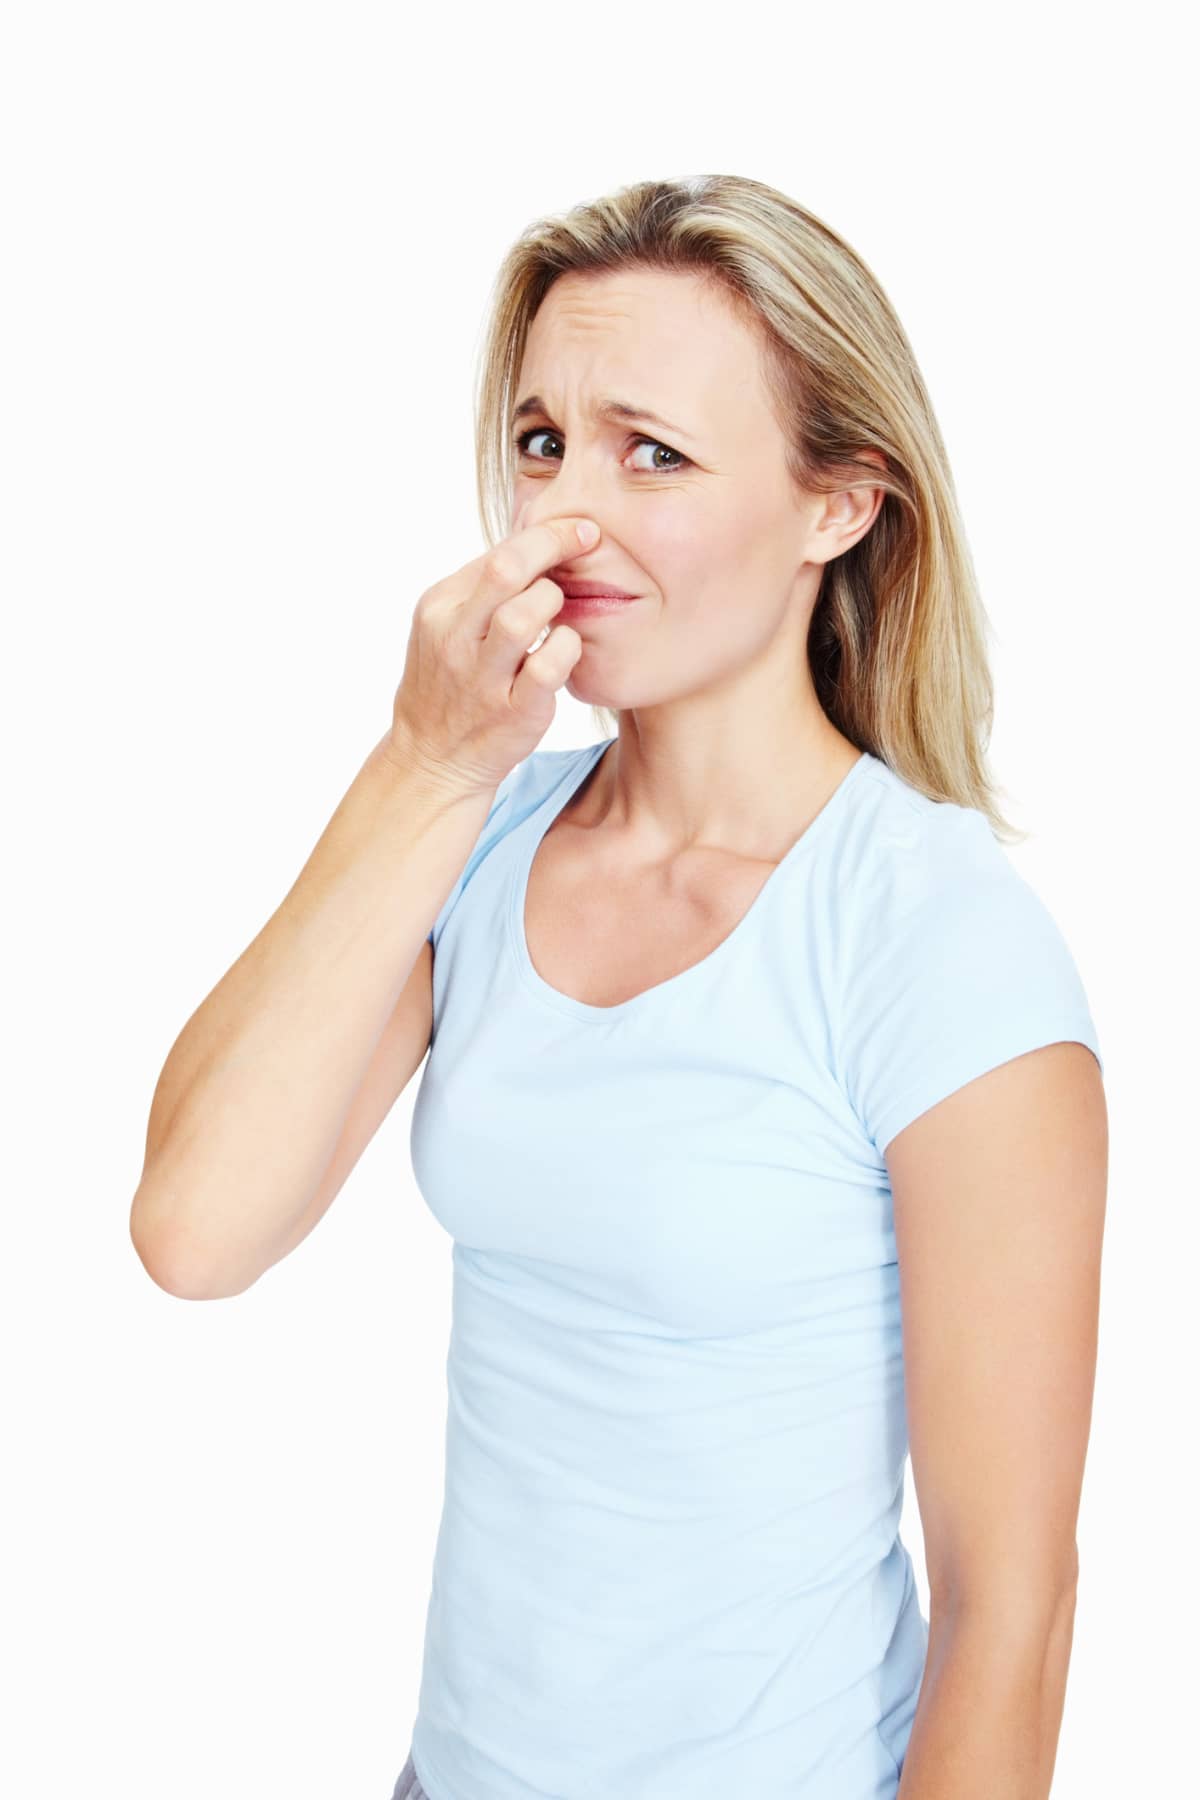 Woman pinching her nose in disgust